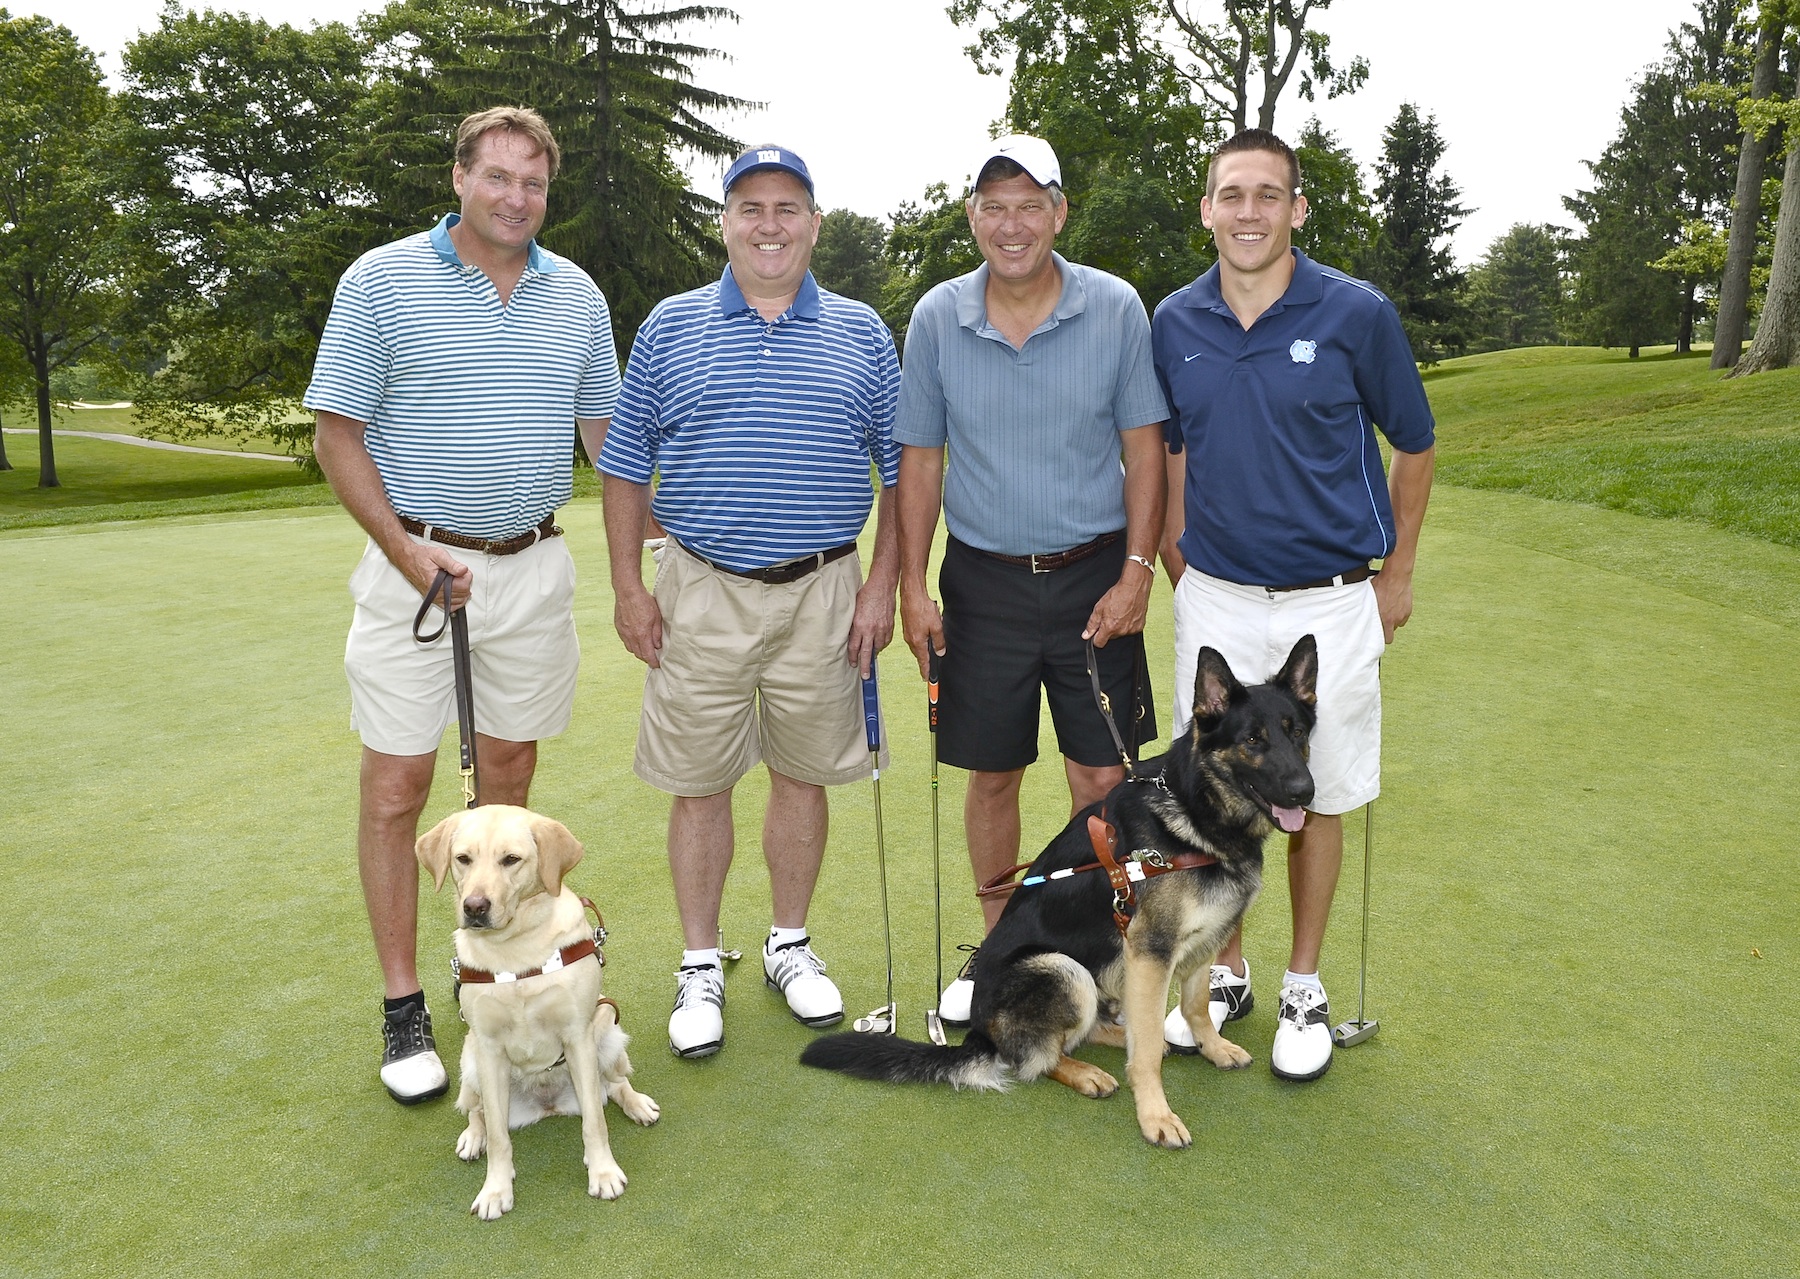 Guiding Eyes for the Blind’s Sponsor of the Year John DeVito (of Katonah), owner of A. DeVito & Son, will be honored at the 37th annual Guiding Eyes Golf Classic on June 9.